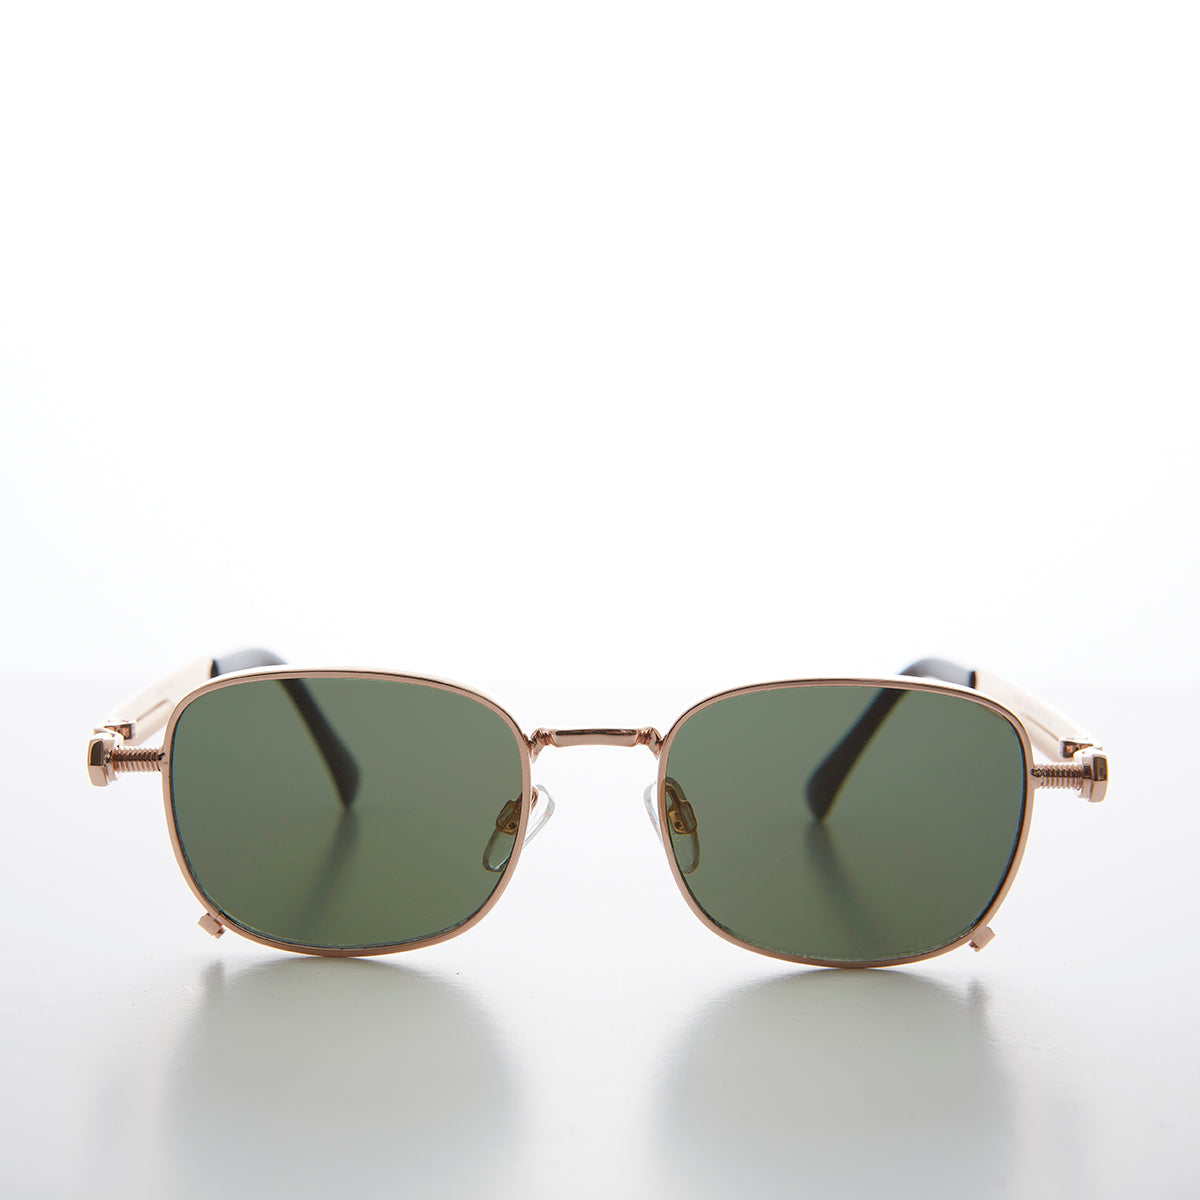 Tailored Steampunk Gold Sunglasses with Industrial Temples